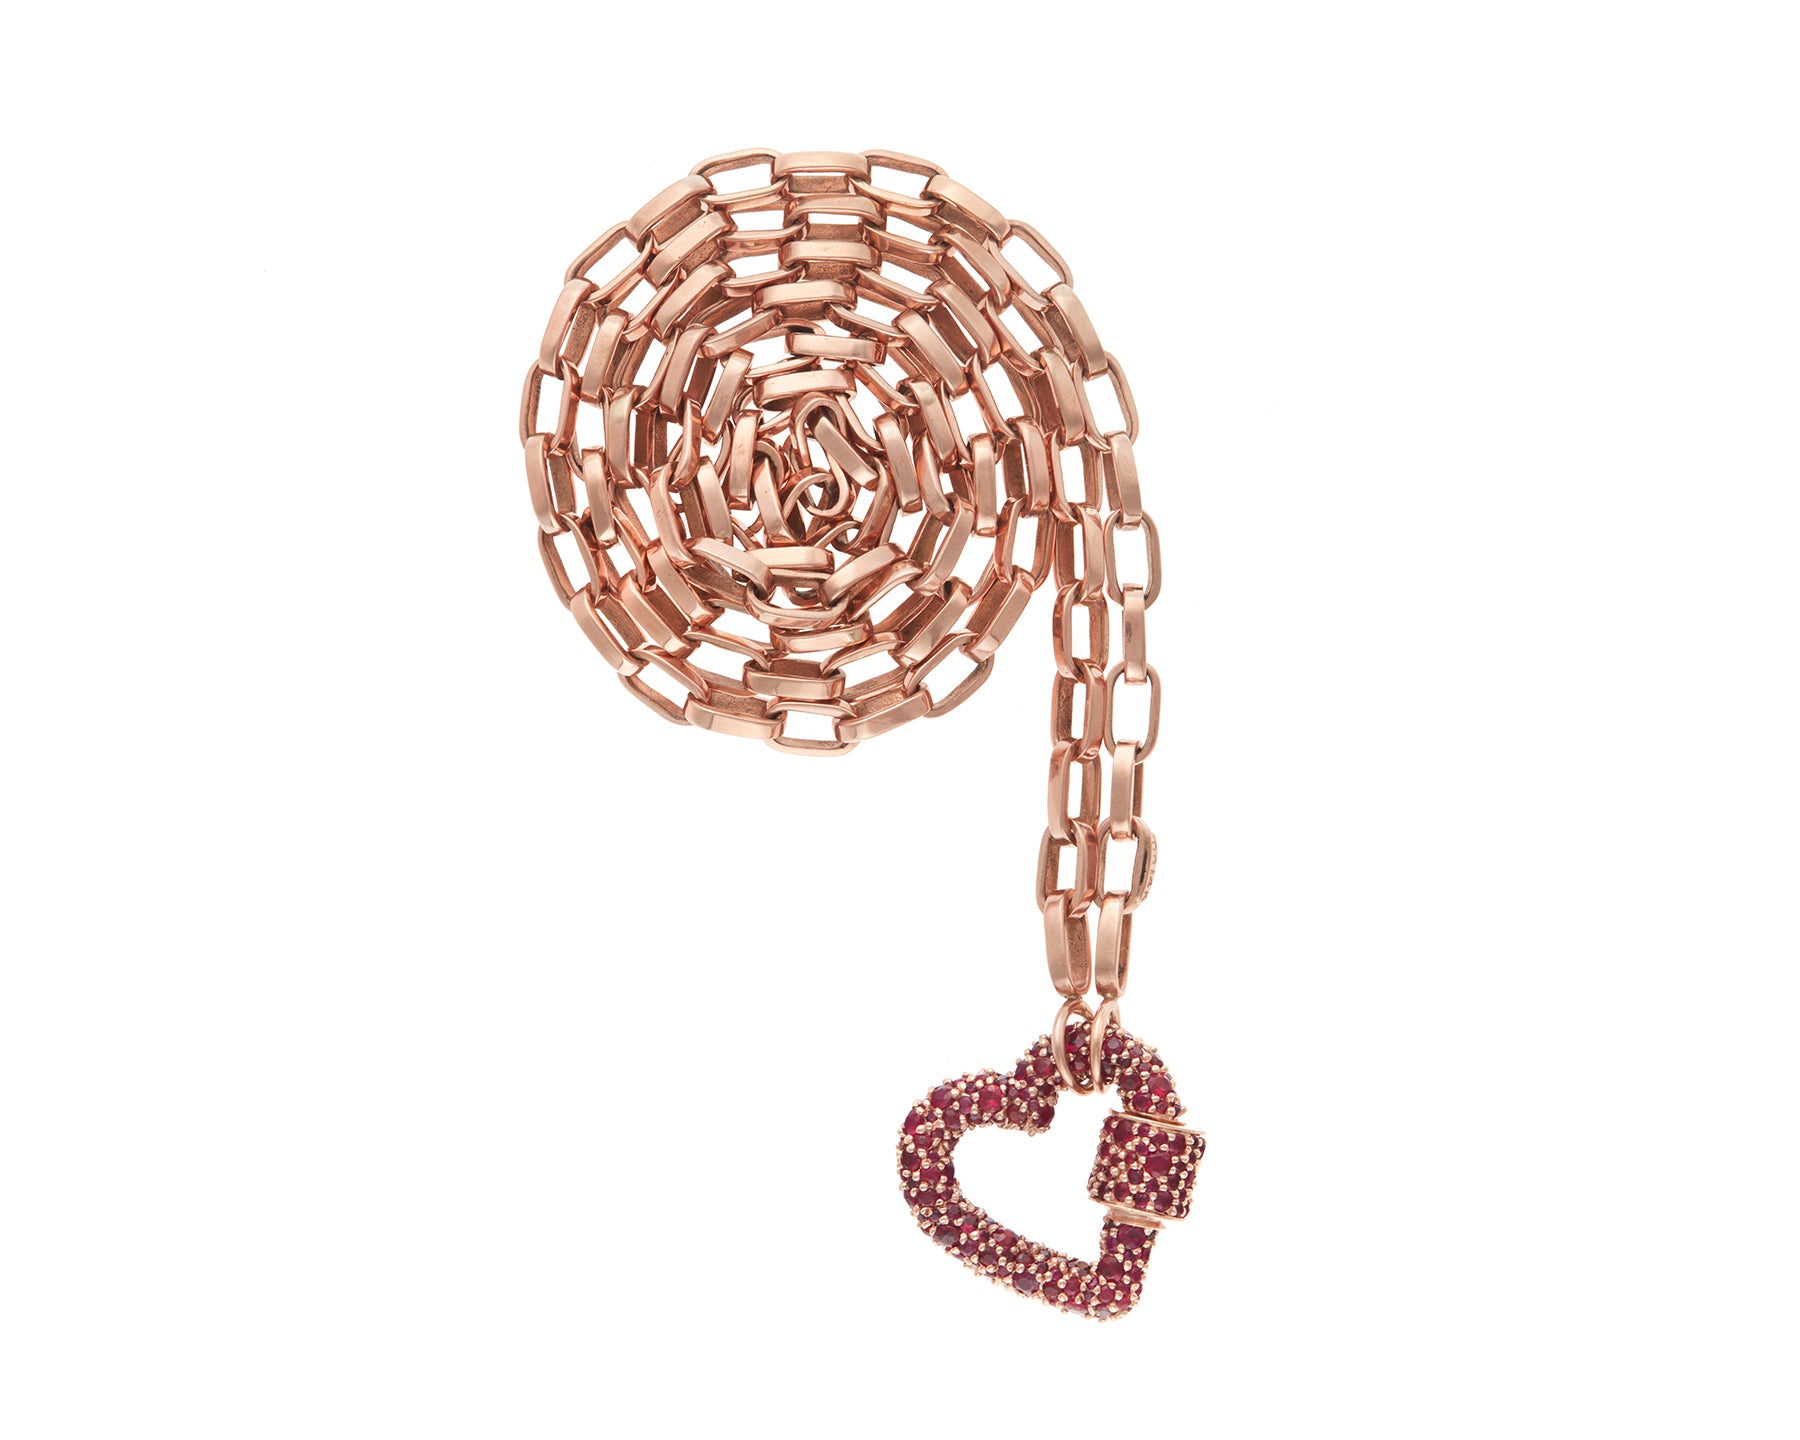 Curled up rose gold necklace with ruby heart charm